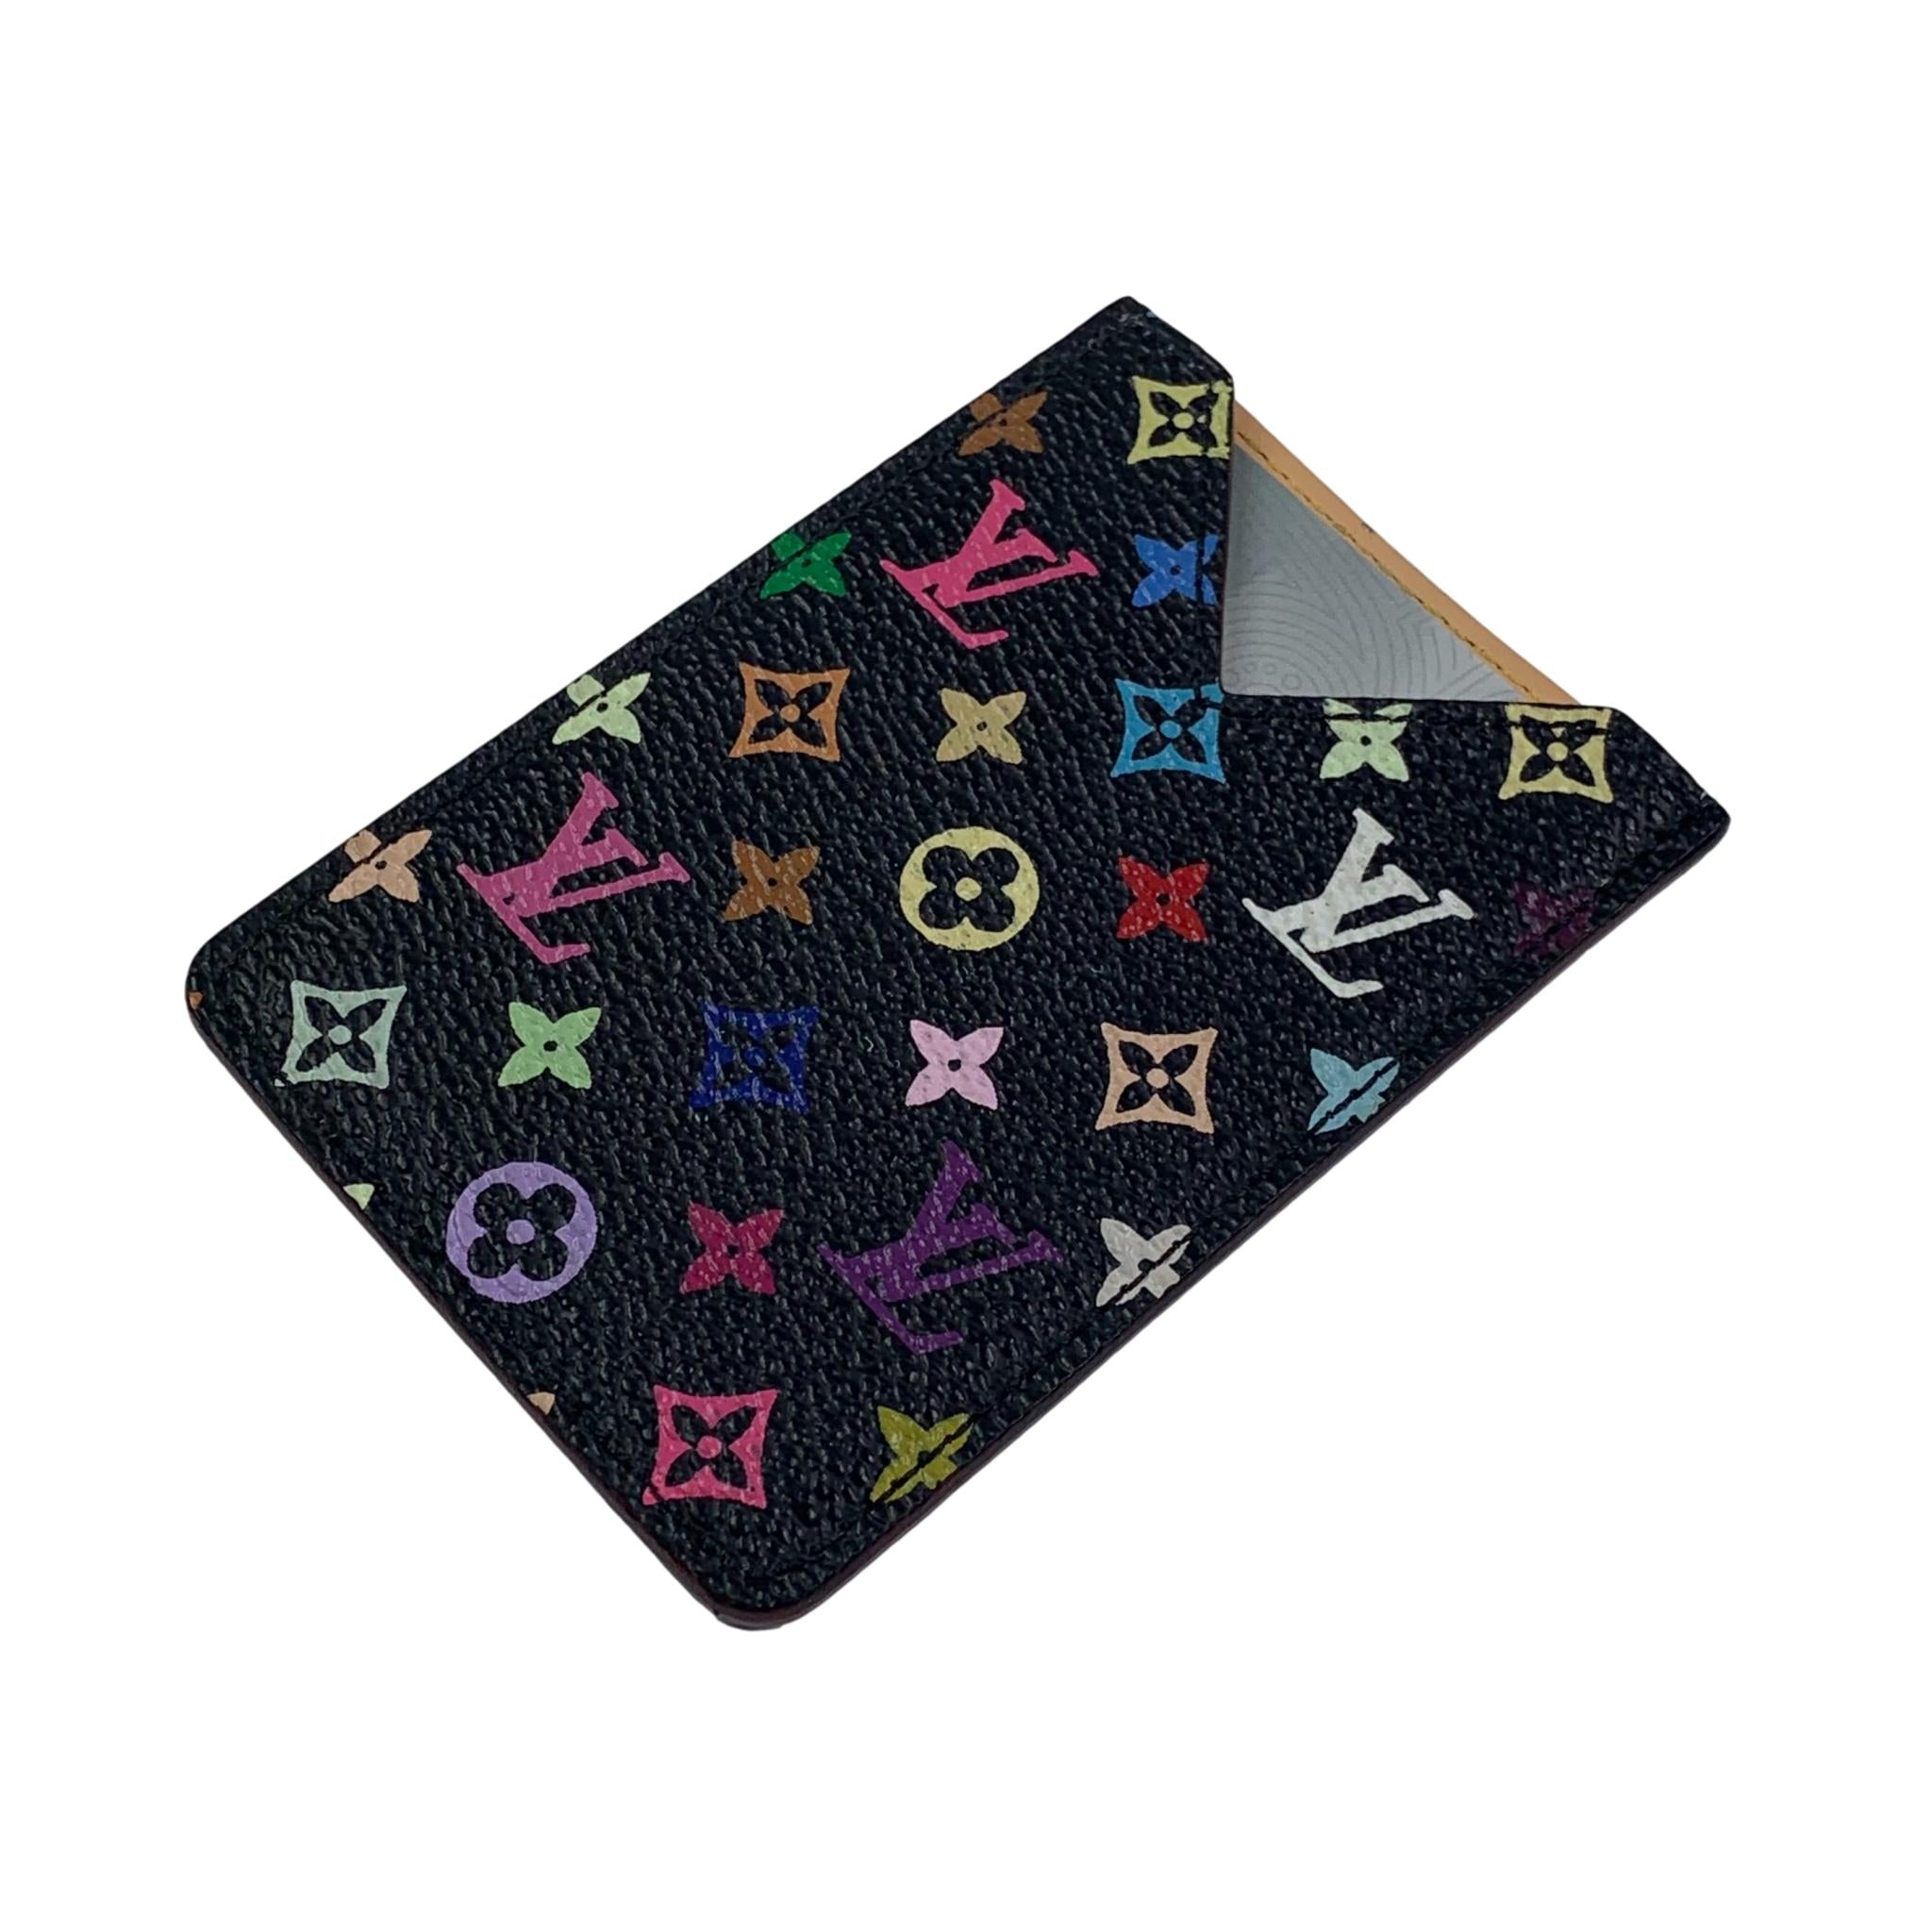 Louis Vuitton Multicolor Playing Cards Set by Takashi Murakami at 1stDibs   louis vuitton playing cards, takashi murakami playing cards, takashi  murakami uno cards